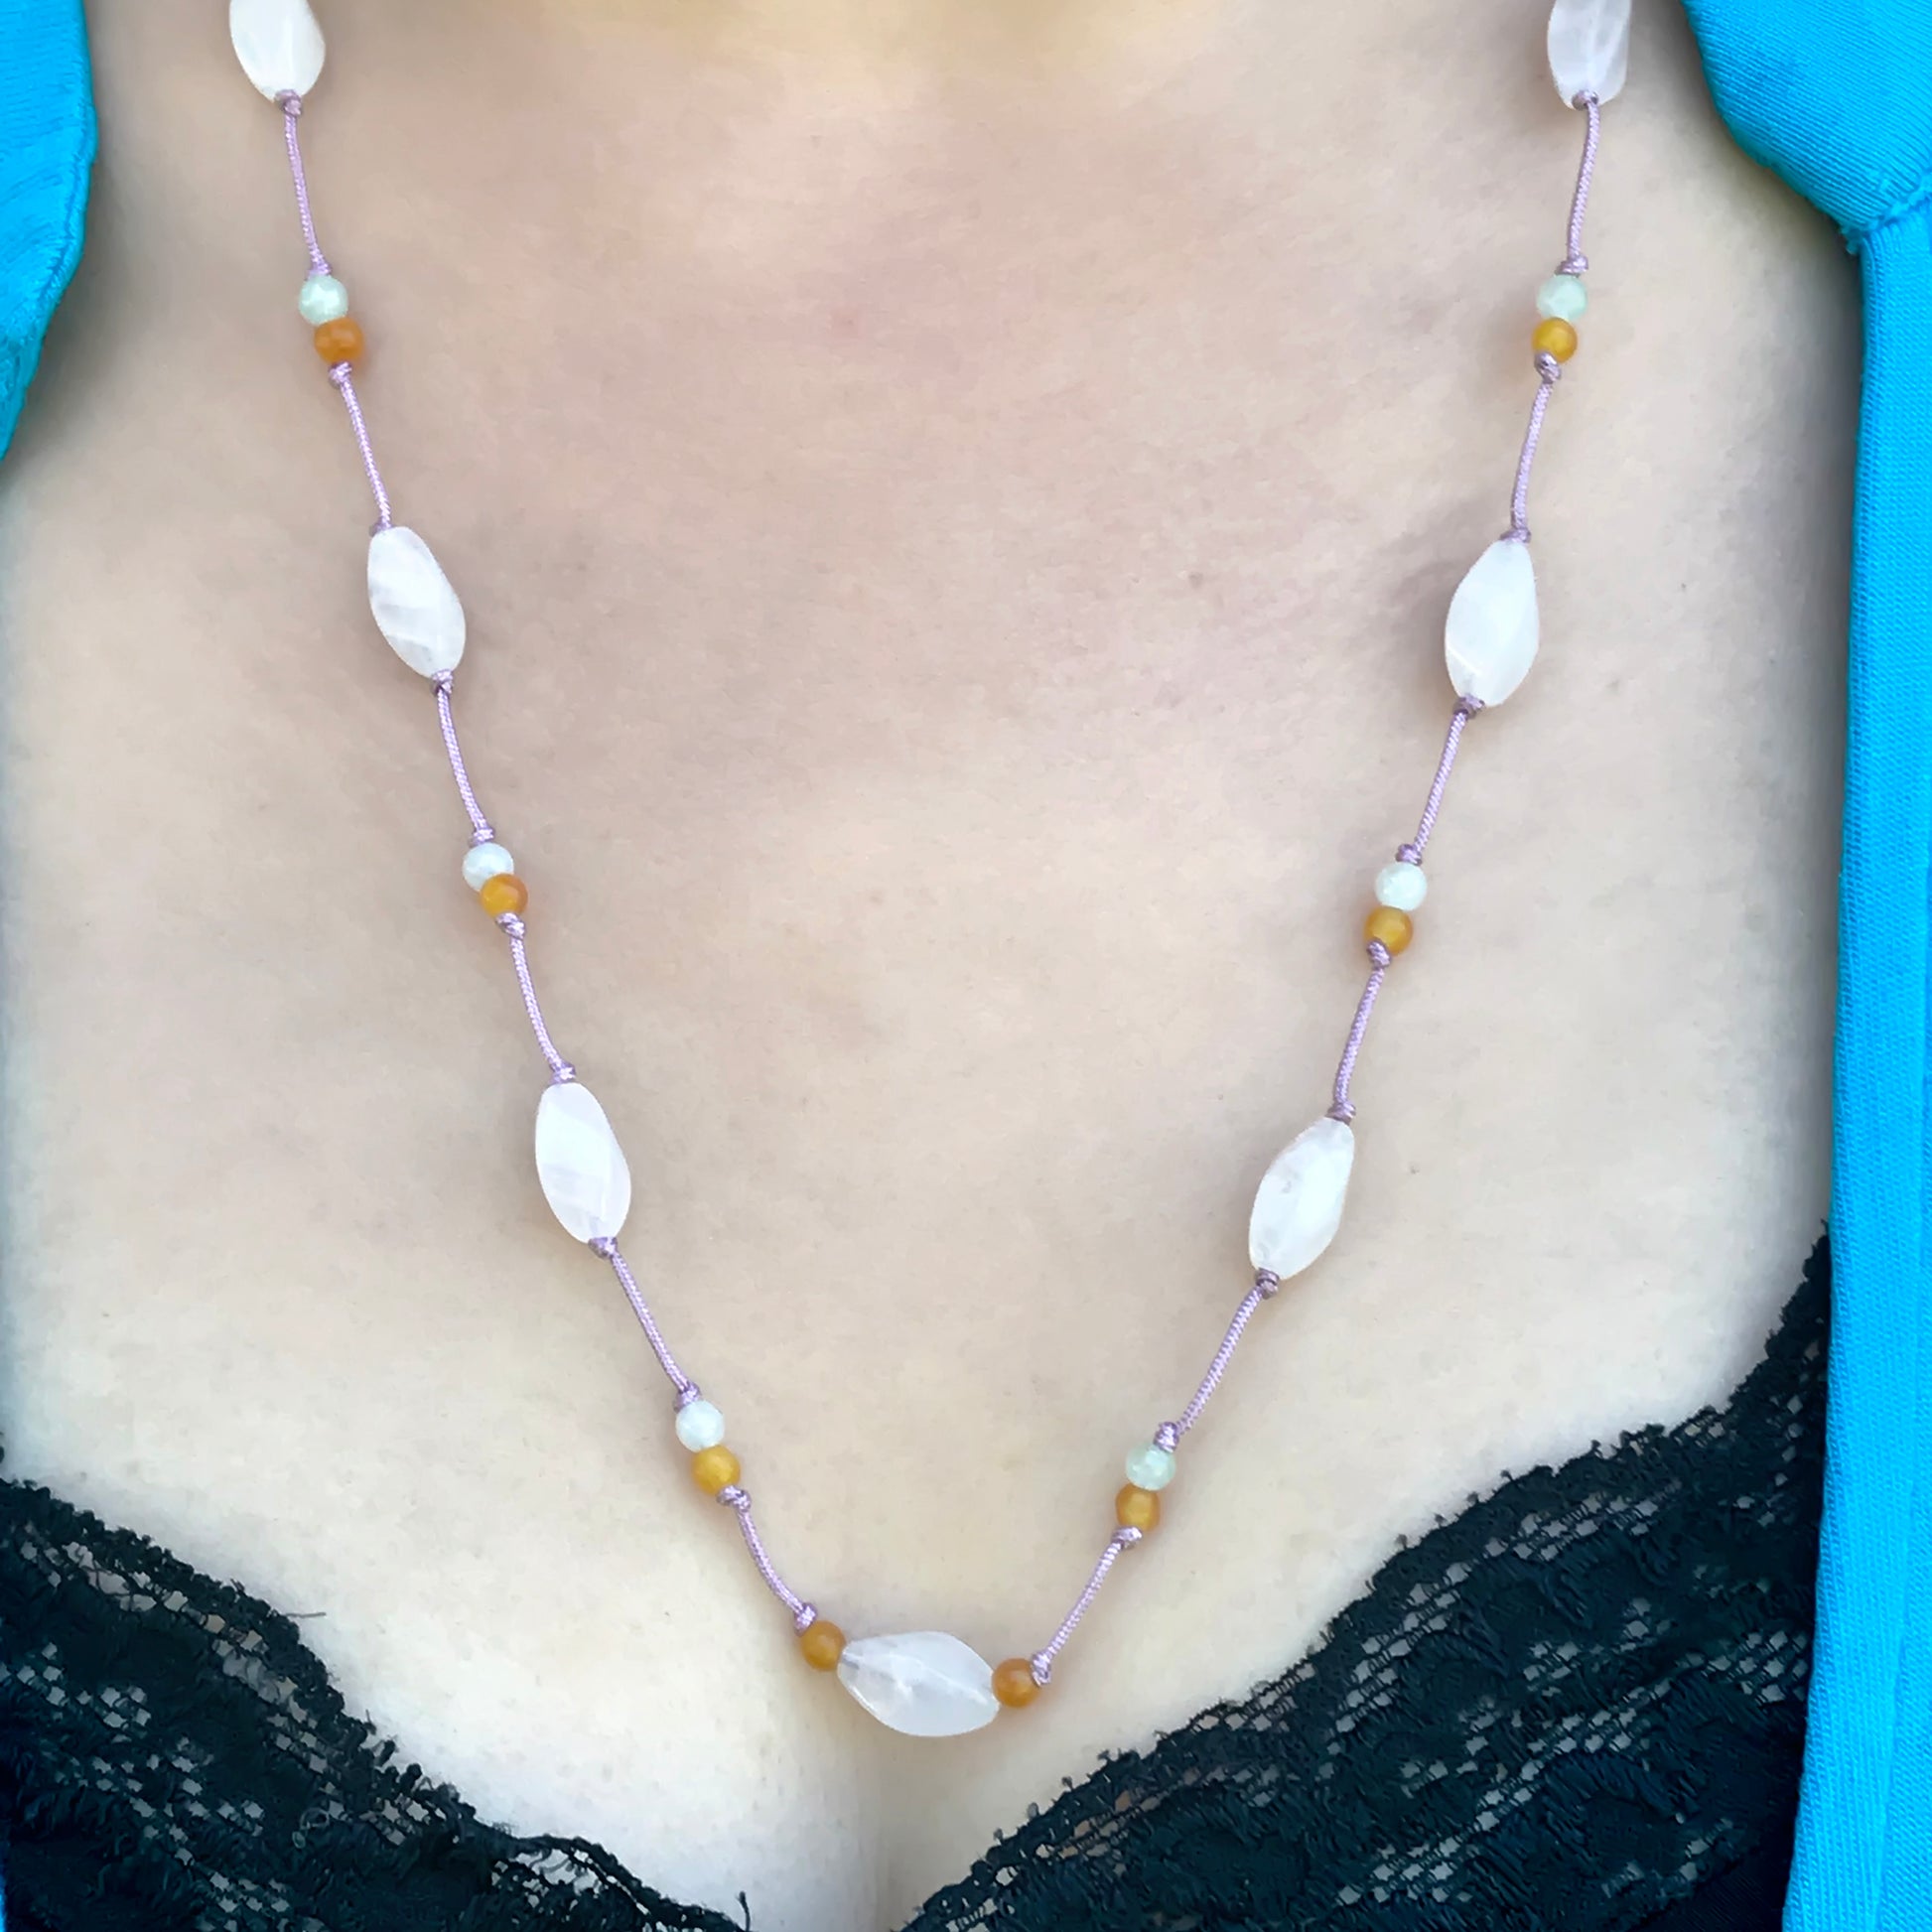 Show Off Your Style with the Adjustable Oblong Rose Quartz Necklace